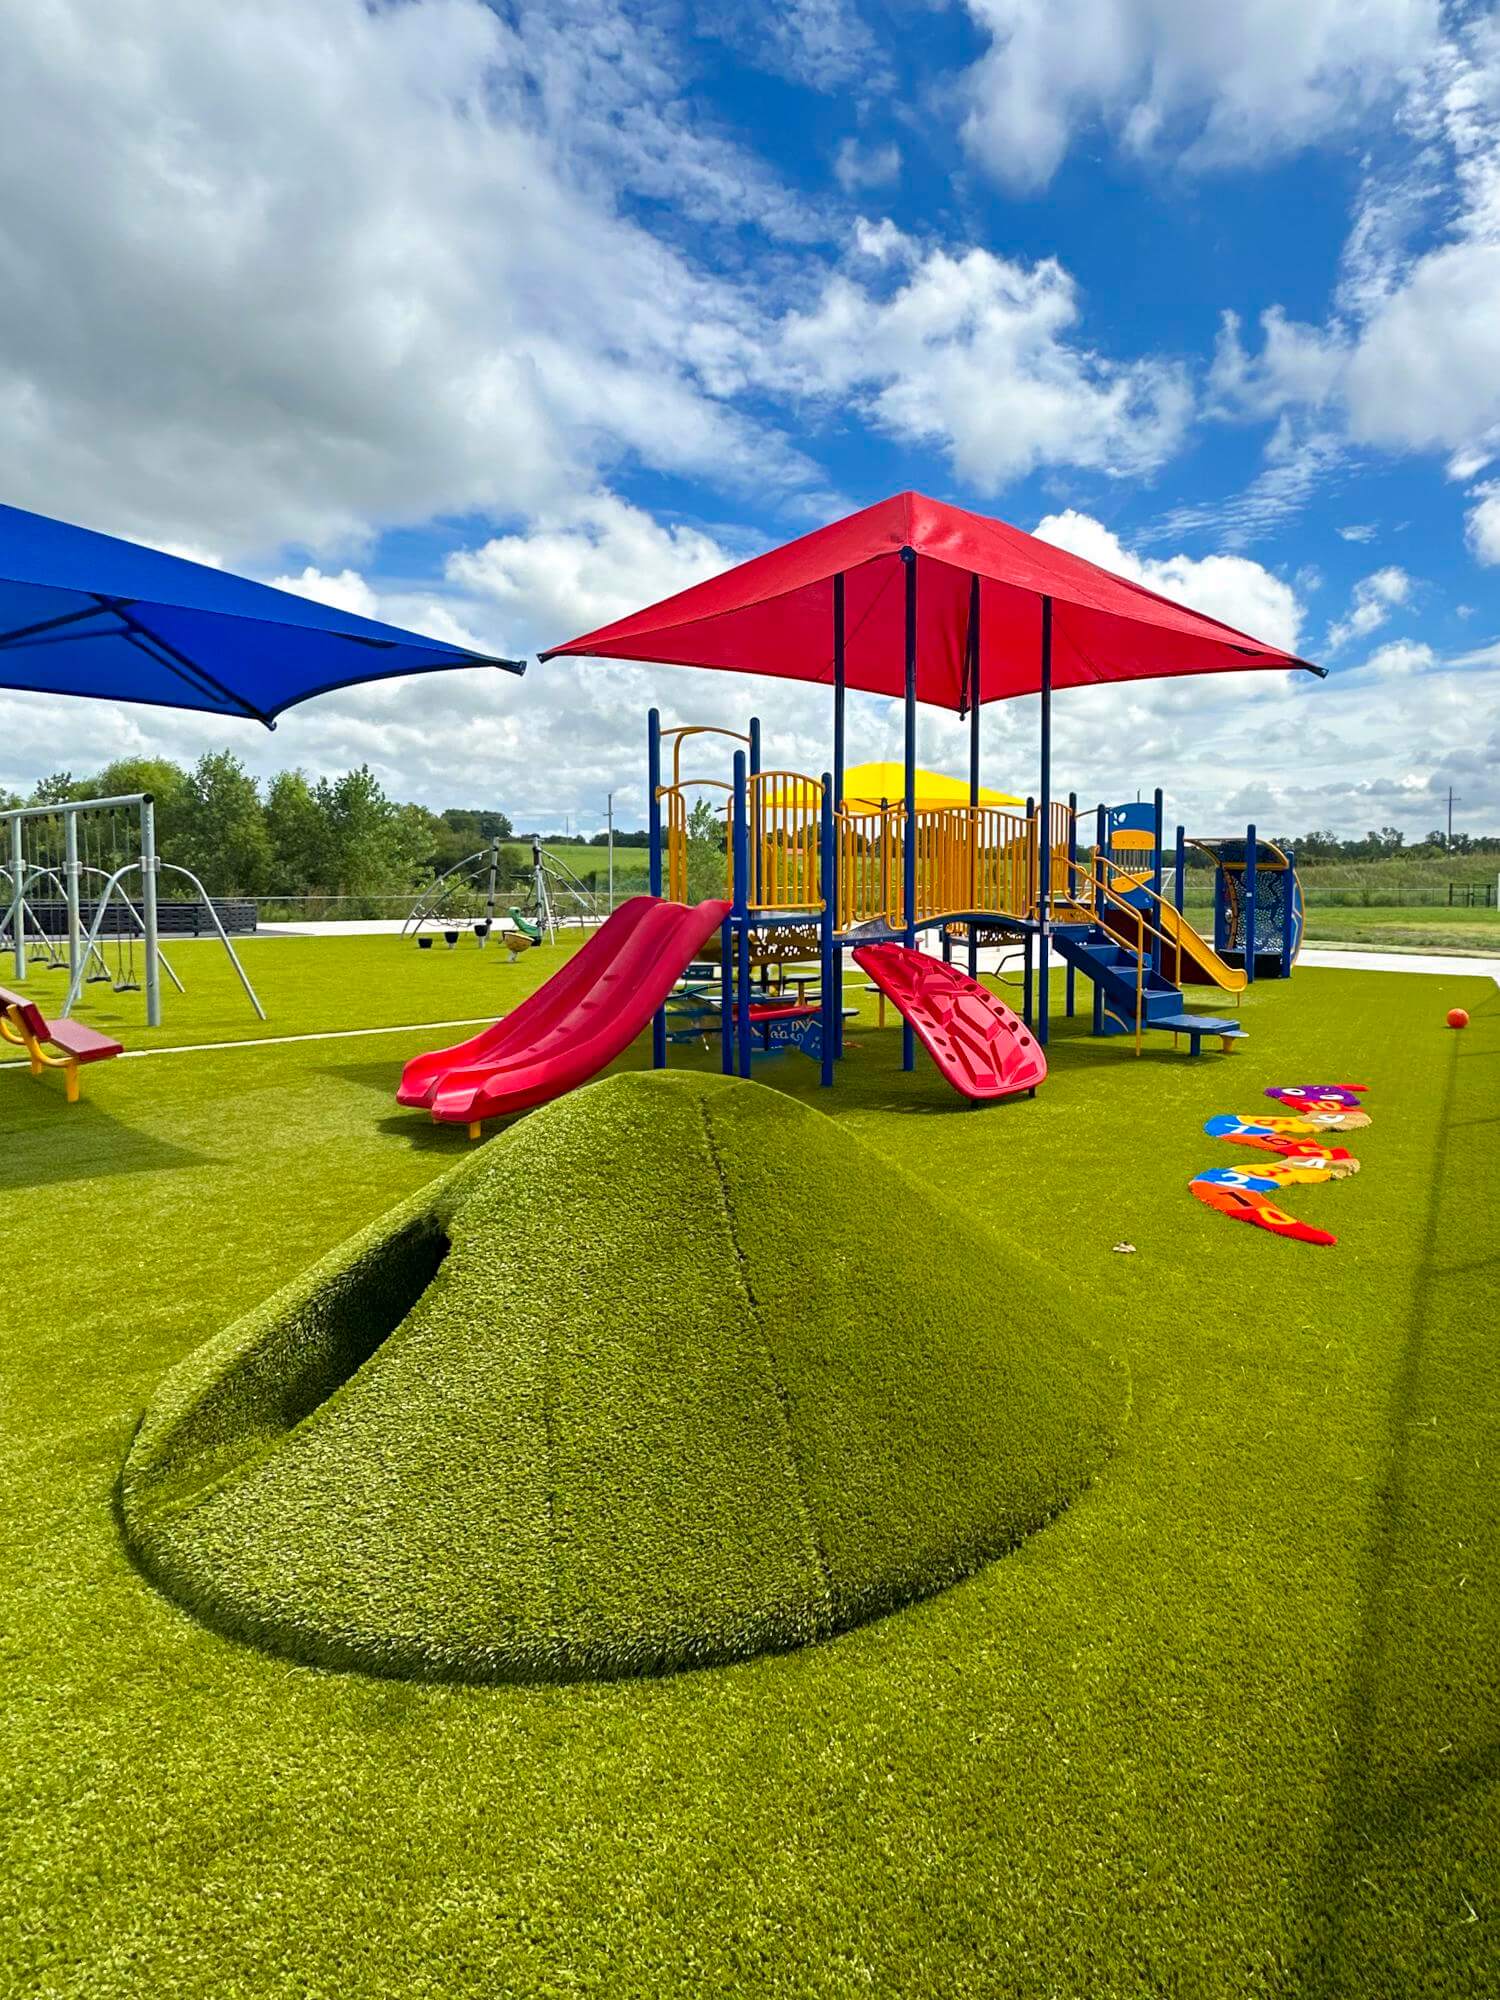 Close-up of a playground with artificial turf mounds, red and blue sunshades, and a variety of play equipment.